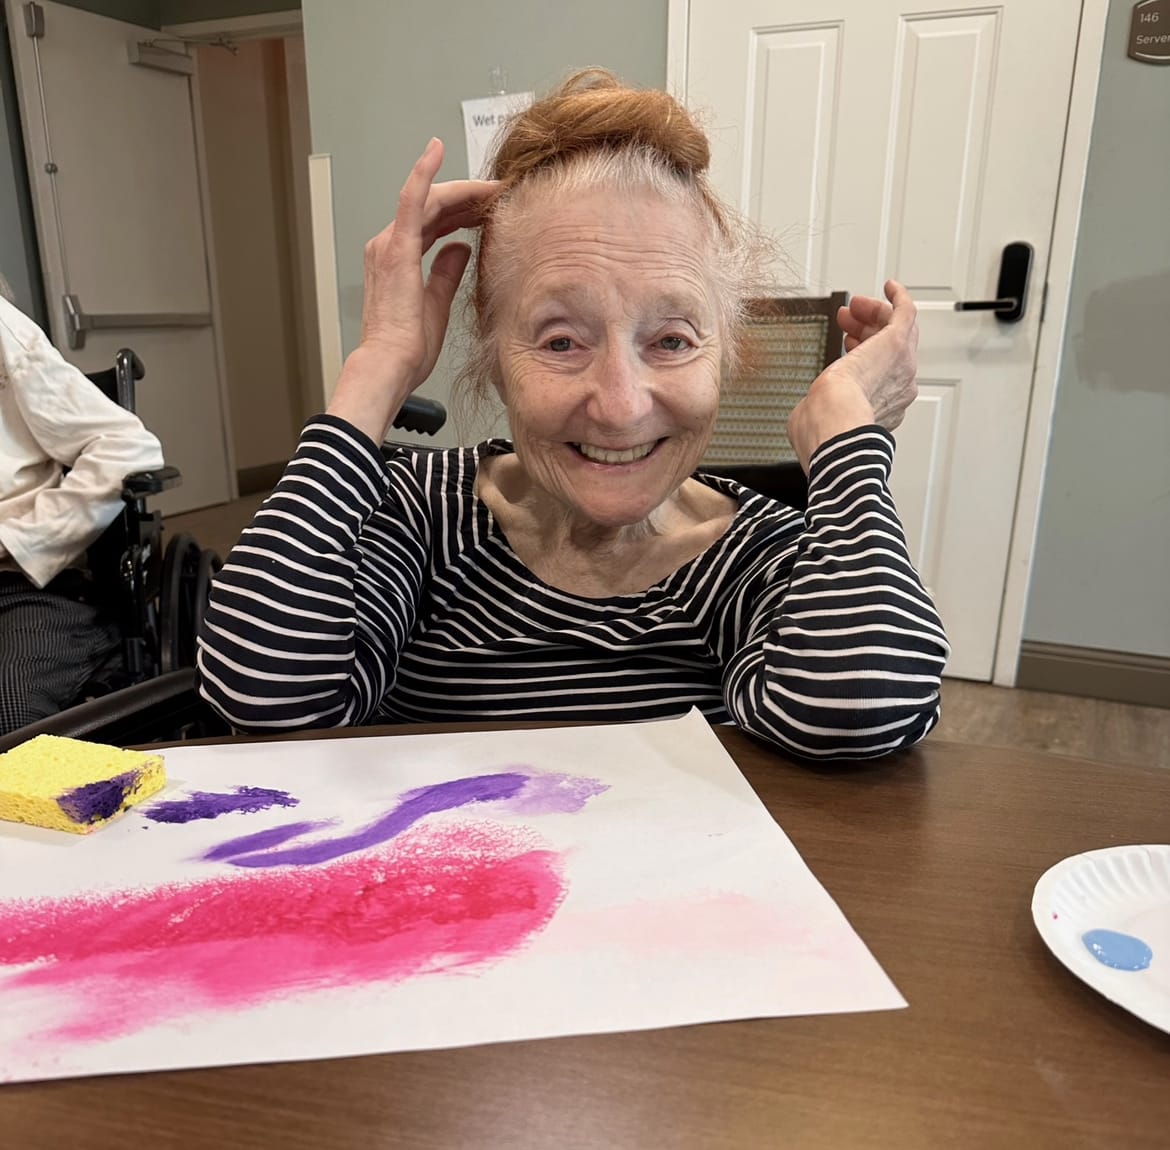 A senior smiling with a hand-drawn heart image below her